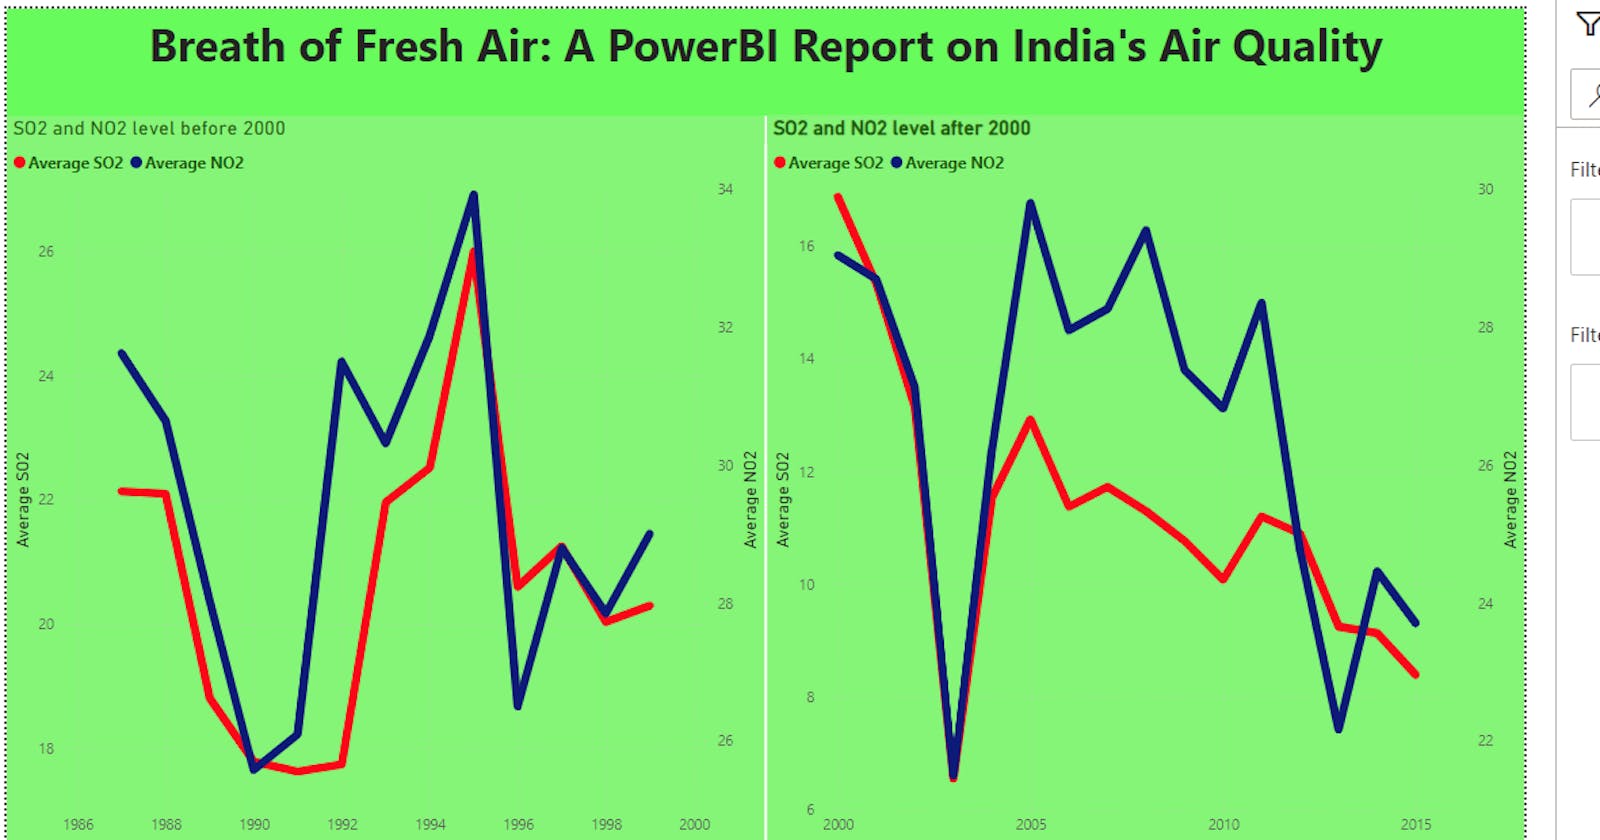 Breath of Fresh Air: A PowerBI Report on India's Air Quality